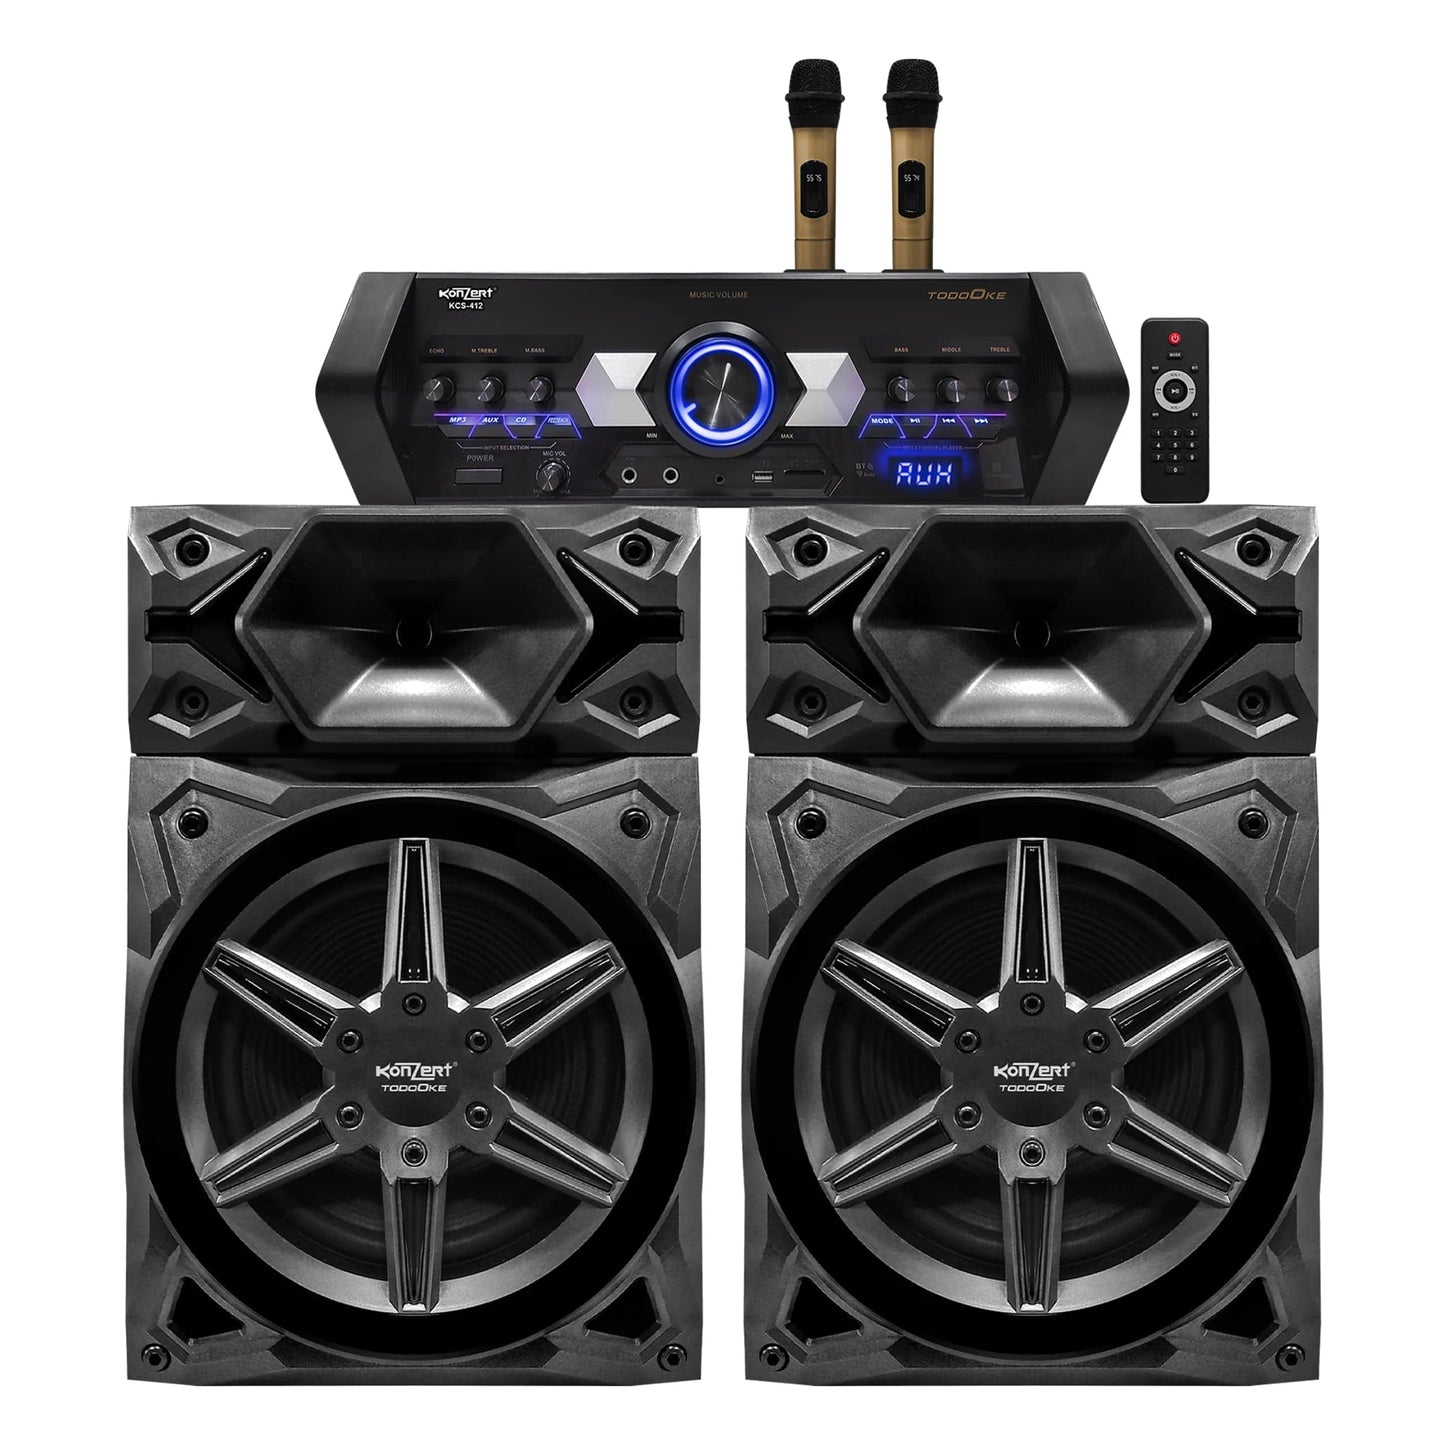 Konzert TodoOke KCS-412 6000W 12" 2-Way Woofer Mini Component Karaoke Speaker System (SET) with 2 Channel Output, Bluetooth, 2 UHF Wireless Mic / USB / SD Card Slot and FM Radio Tuner with RCA and 4 Mic Input and Remote Control